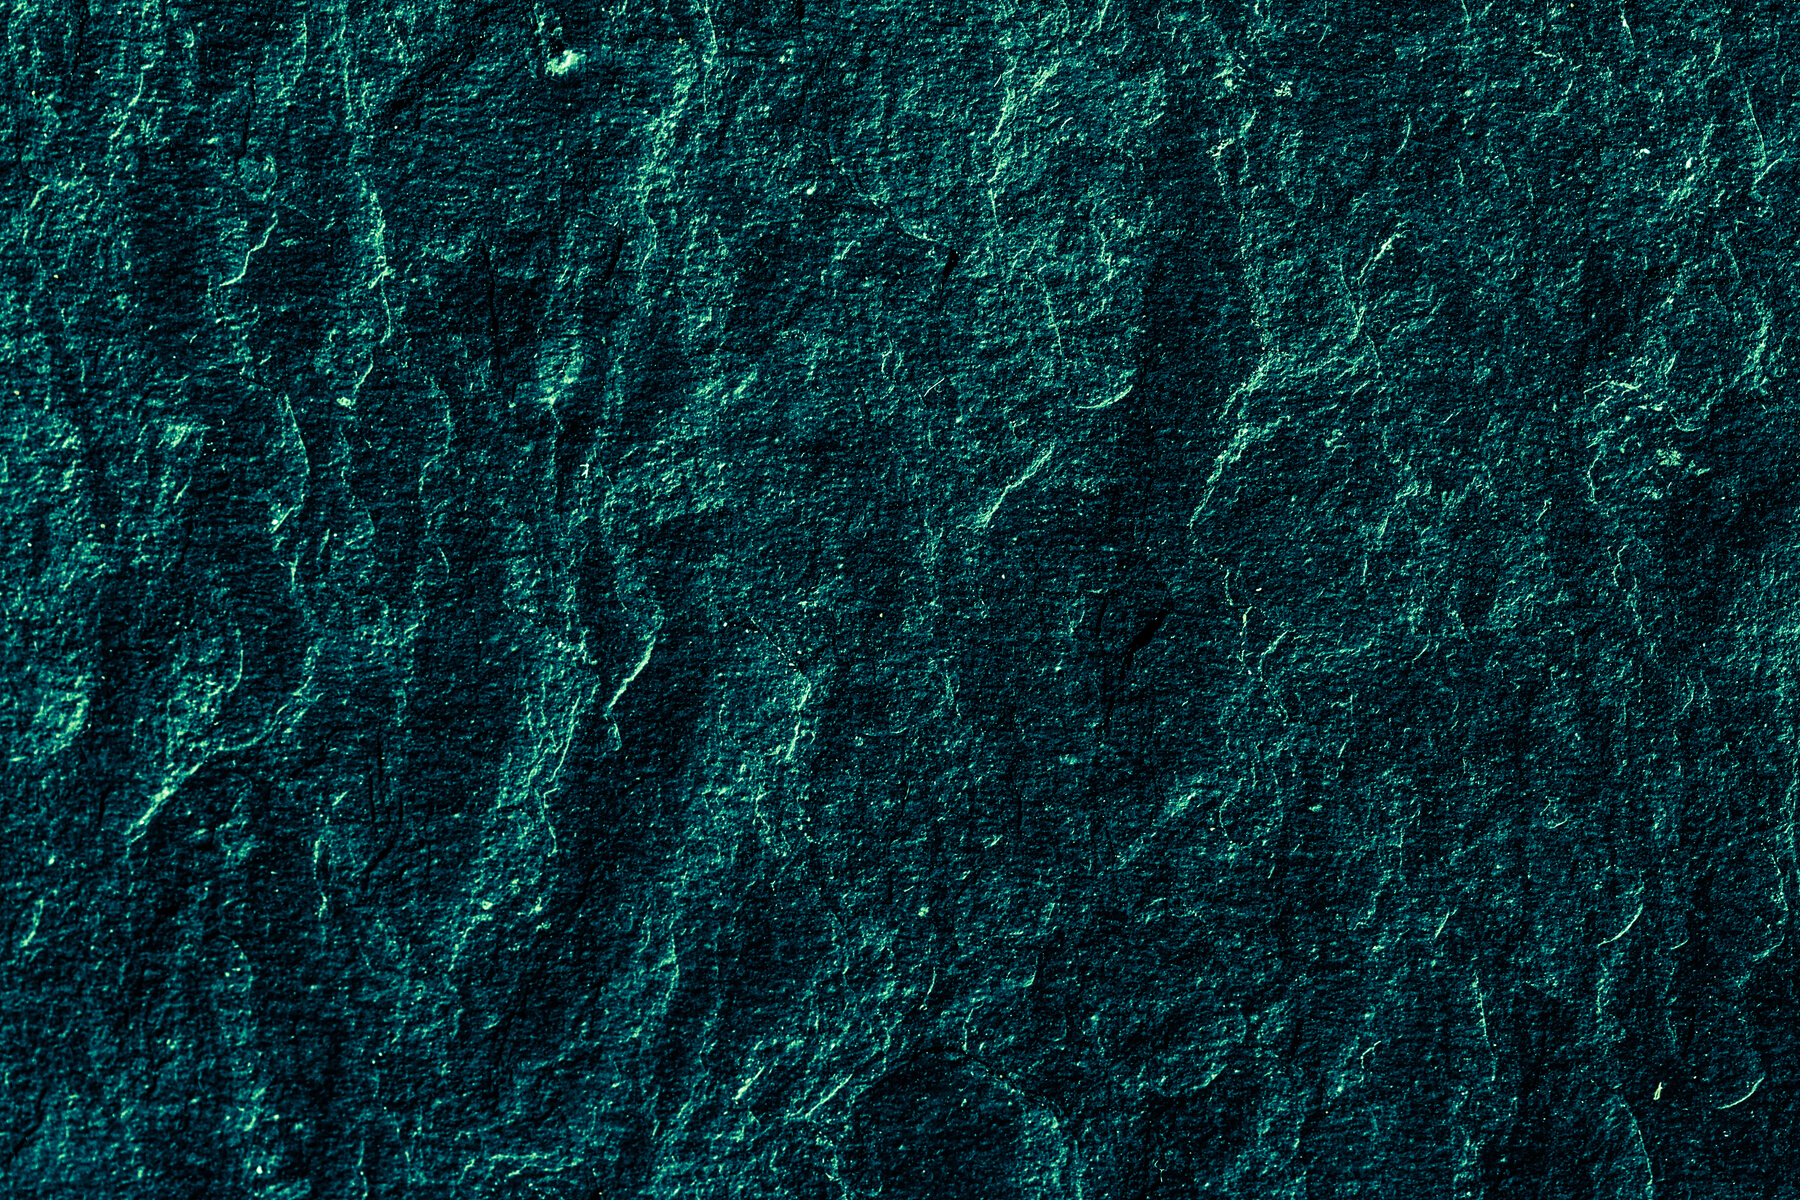 Emerald Green Stone Texture as Abstract Background, Design Material and Textured Surface